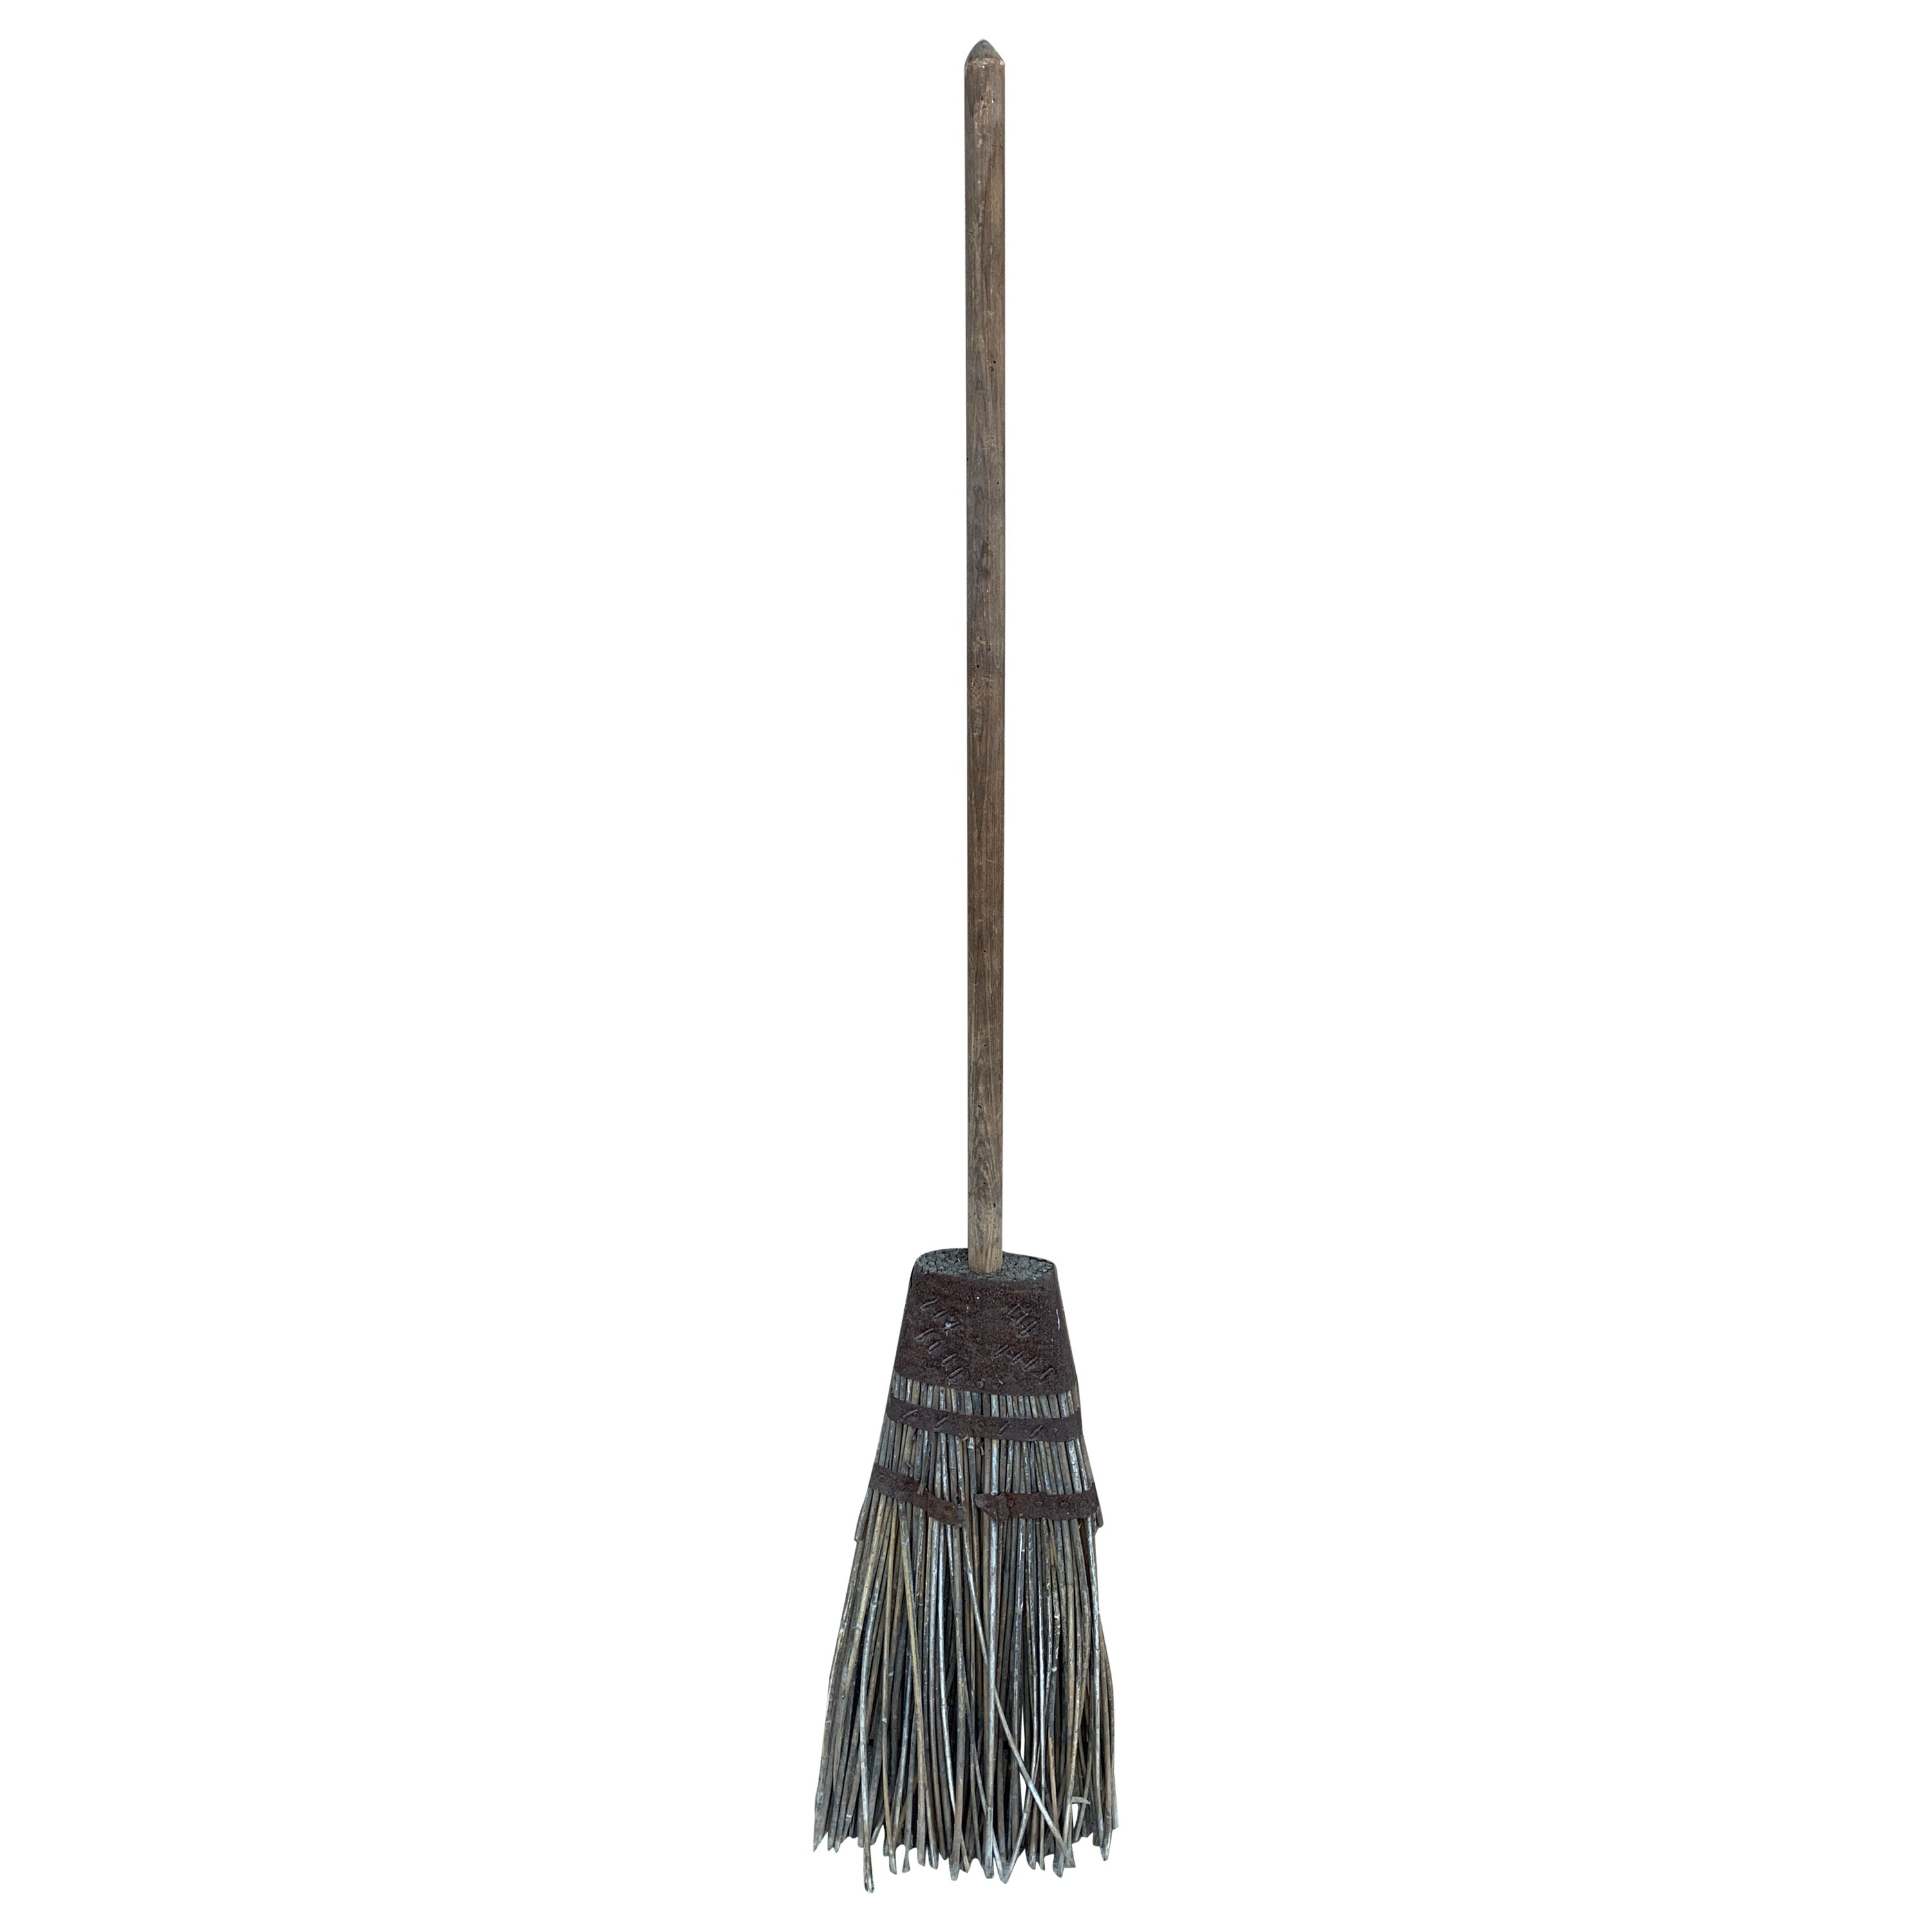 Antique Early 19th Century Rustic Hand Made Wooden Broom For Sale